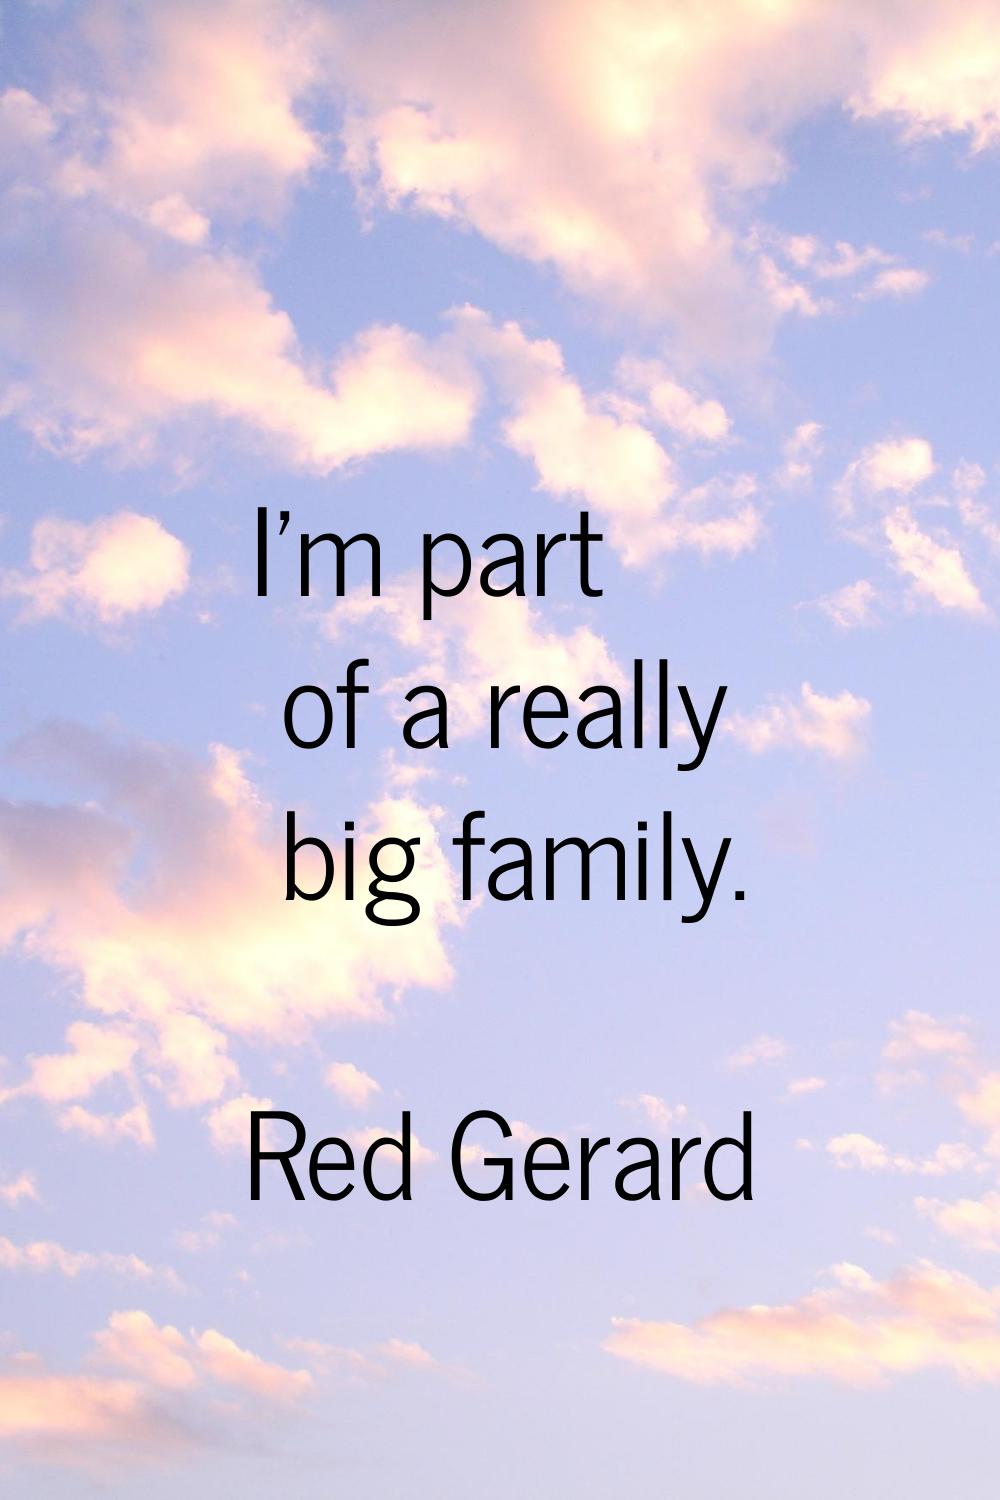 I'm part of a really big family.